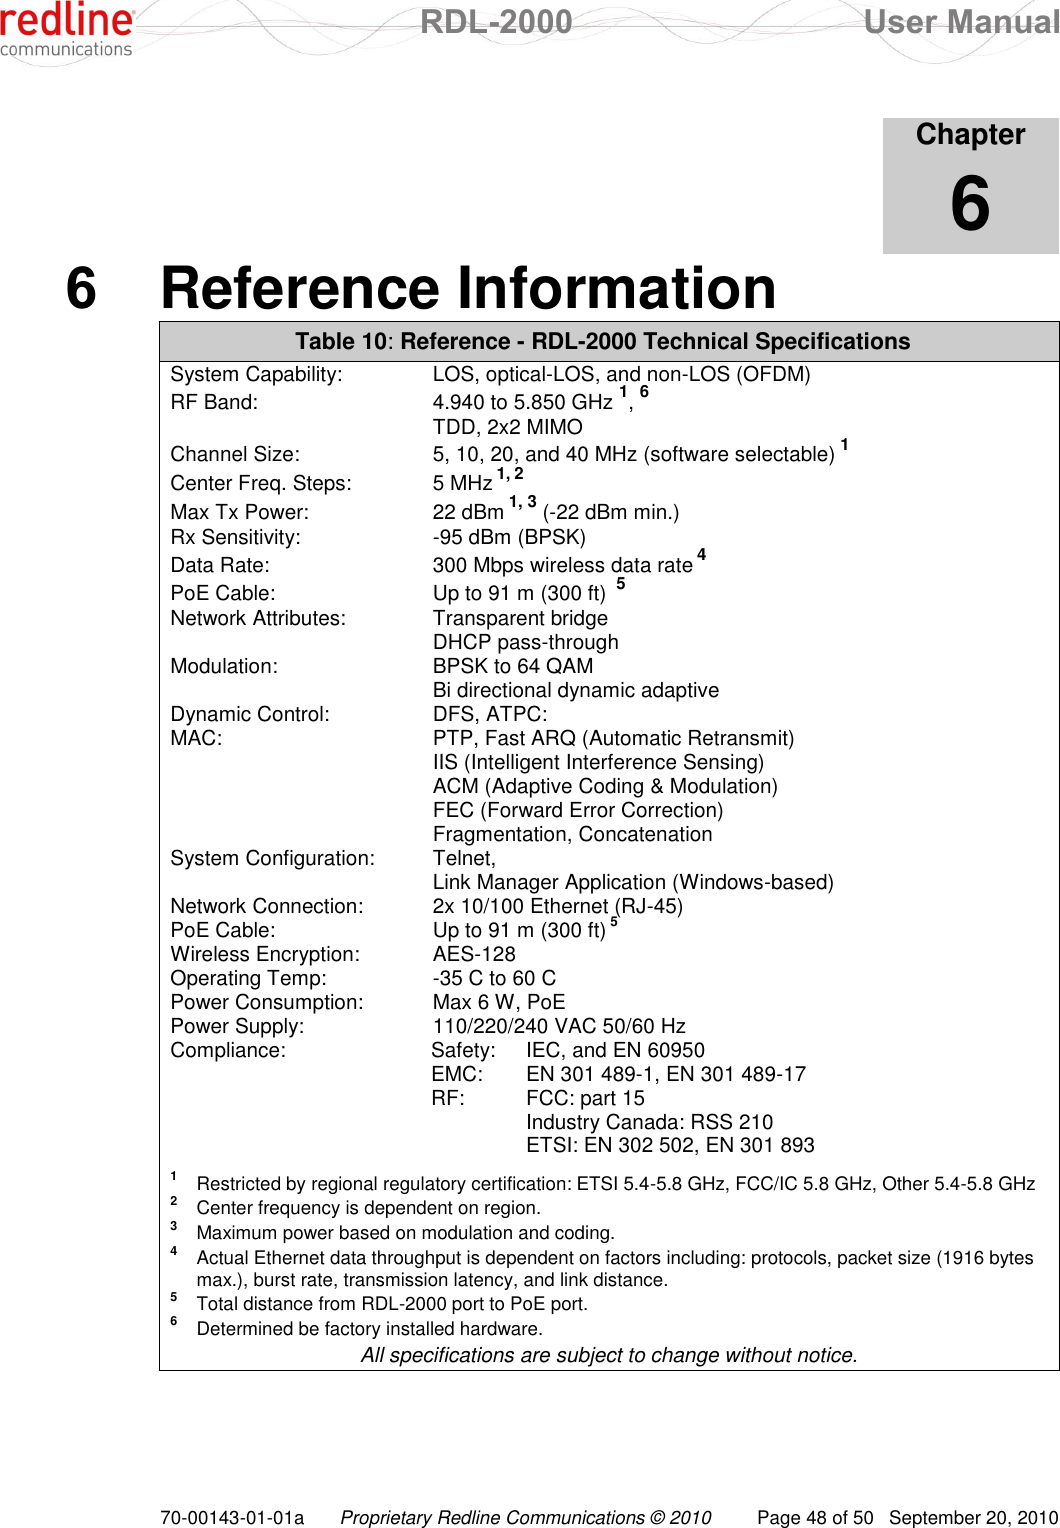  RDL-2000  User Manual 70-00143-01-01a Proprietary Redline Communications © 2010  Page 48 of 50  September 20, 2010            Chapter 6 6  Reference Information Table 10: Reference - RDL-2000 Technical Specifications System Capability:  LOS, optical-LOS, and non-LOS (OFDM) RF Band:  4.940 to 5.850 GHz 1, 6   TDD, 2x2 MIMO Channel Size:  5, 10, 20, and 40 MHz (software selectable) 1 Center Freq. Steps:  5 MHz 1, 2 Max Tx Power:  22 dBm 1, 3 (-22 dBm min.) Rx Sensitivity:  -95 dBm (BPSK) Data Rate:  300 Mbps wireless data rate 4 PoE Cable:  Up to 91 m (300 ft)  5 Network Attributes:  Transparent bridge   DHCP pass-through Modulation:  BPSK to 64 QAM   Bi directional dynamic adaptive Dynamic Control:  DFS, ATPC: MAC:  PTP, Fast ARQ (Automatic Retransmit)   IIS (Intelligent Interference Sensing)   ACM (Adaptive Coding &amp; Modulation)   FEC (Forward Error Correction)   Fragmentation, Concatenation System Configuration:  Telnet,   Link Manager Application (Windows-based) Network Connection:  2x 10/100 Ethernet (RJ-45) PoE Cable:  Up to 91 m (300 ft) 5 Wireless Encryption:  AES-128  Operating Temp:  -35 C to 60 C Power Consumption:  Max 6 W, PoE Power Supply:  110/220/240 VAC 50/60 Hz Compliance:  Safety:  IEC, and EN 60950   EMC:  EN 301 489-1, EN 301 489-17   RF:  FCC: part 15     Industry Canada: RSS 210     ETSI: EN 302 502, EN 301 893  1  Restricted by regional regulatory certification: ETSI 5.4-5.8 GHz, FCC/IC 5.8 GHz, Other 5.4-5.8 GHz 2  Center frequency is dependent on region. 3   Maximum power based on modulation and coding. 4  Actual Ethernet data throughput is dependent on factors including: protocols, packet size (1916 bytes max.), burst rate, transmission latency, and link distance. 5  Total distance from RDL-2000 port to PoE port. 6  Determined be factory installed hardware. All specifications are subject to change without notice.     